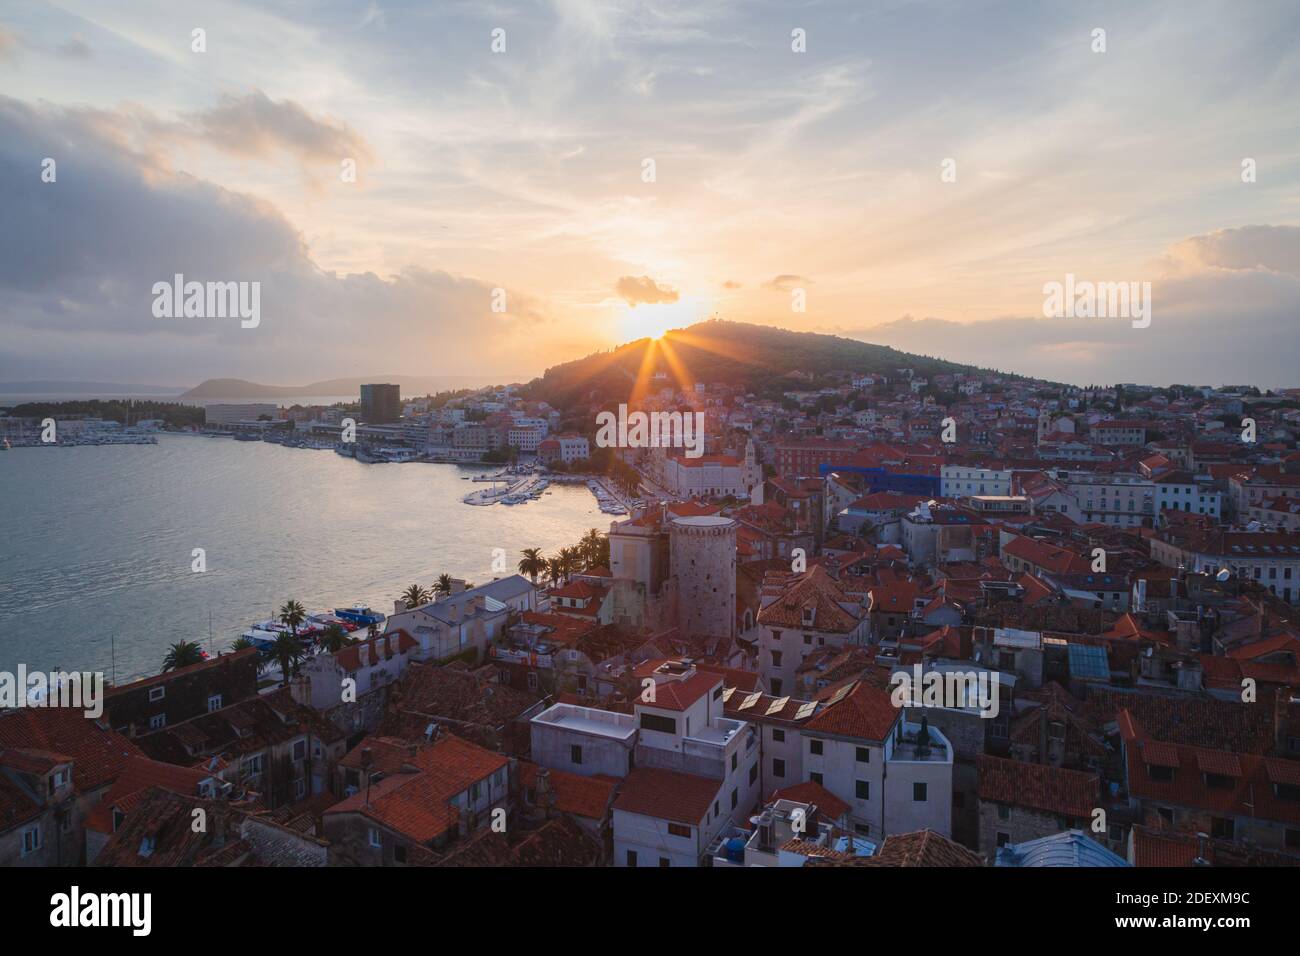 View over Split, Croatia from the tower of Saint Domnius Cathedral Stock Photo